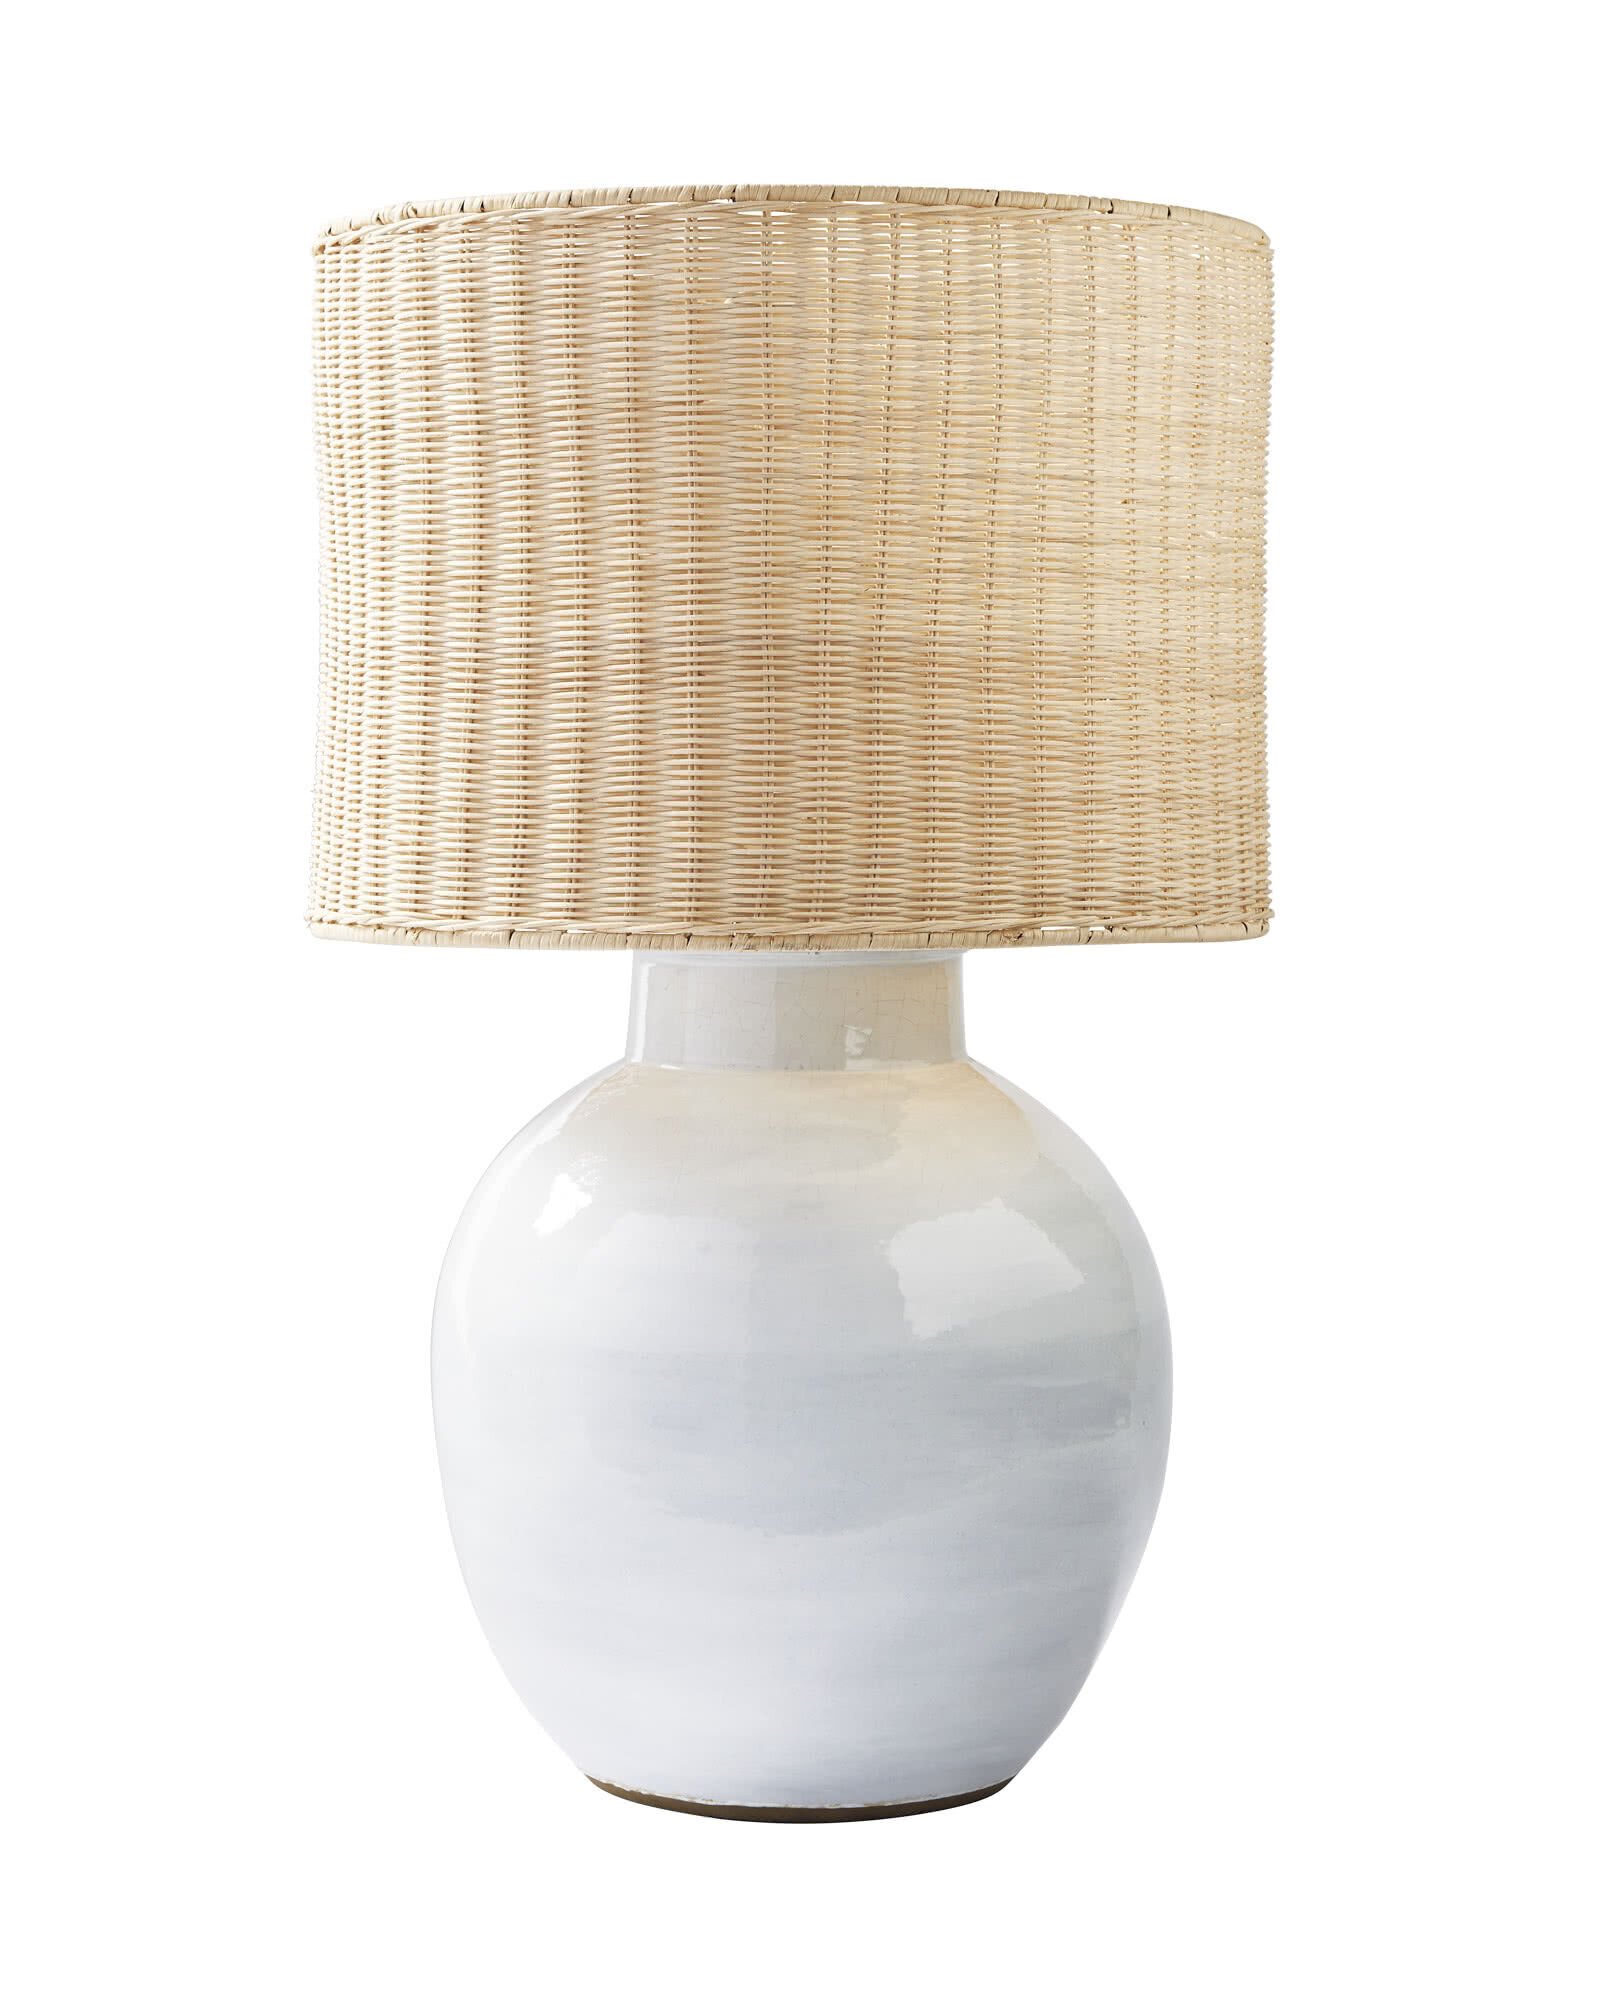 Lighting_Morris_Table_Lamp_Wicker - Serena and Lily.jpeg